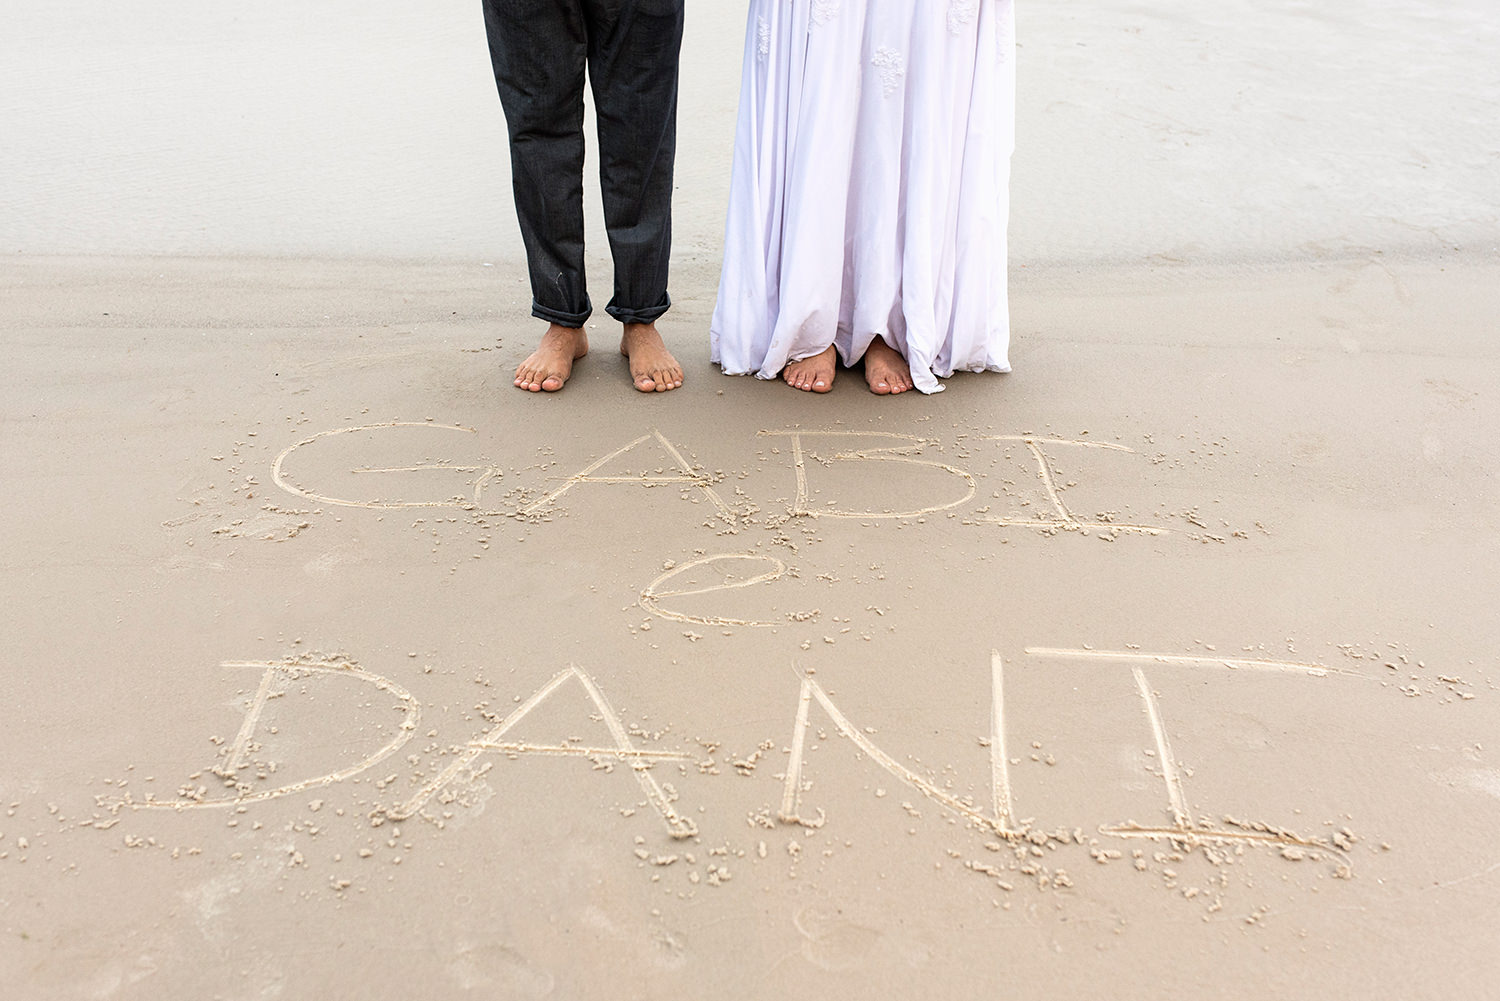 Bride and groom name written at the sand